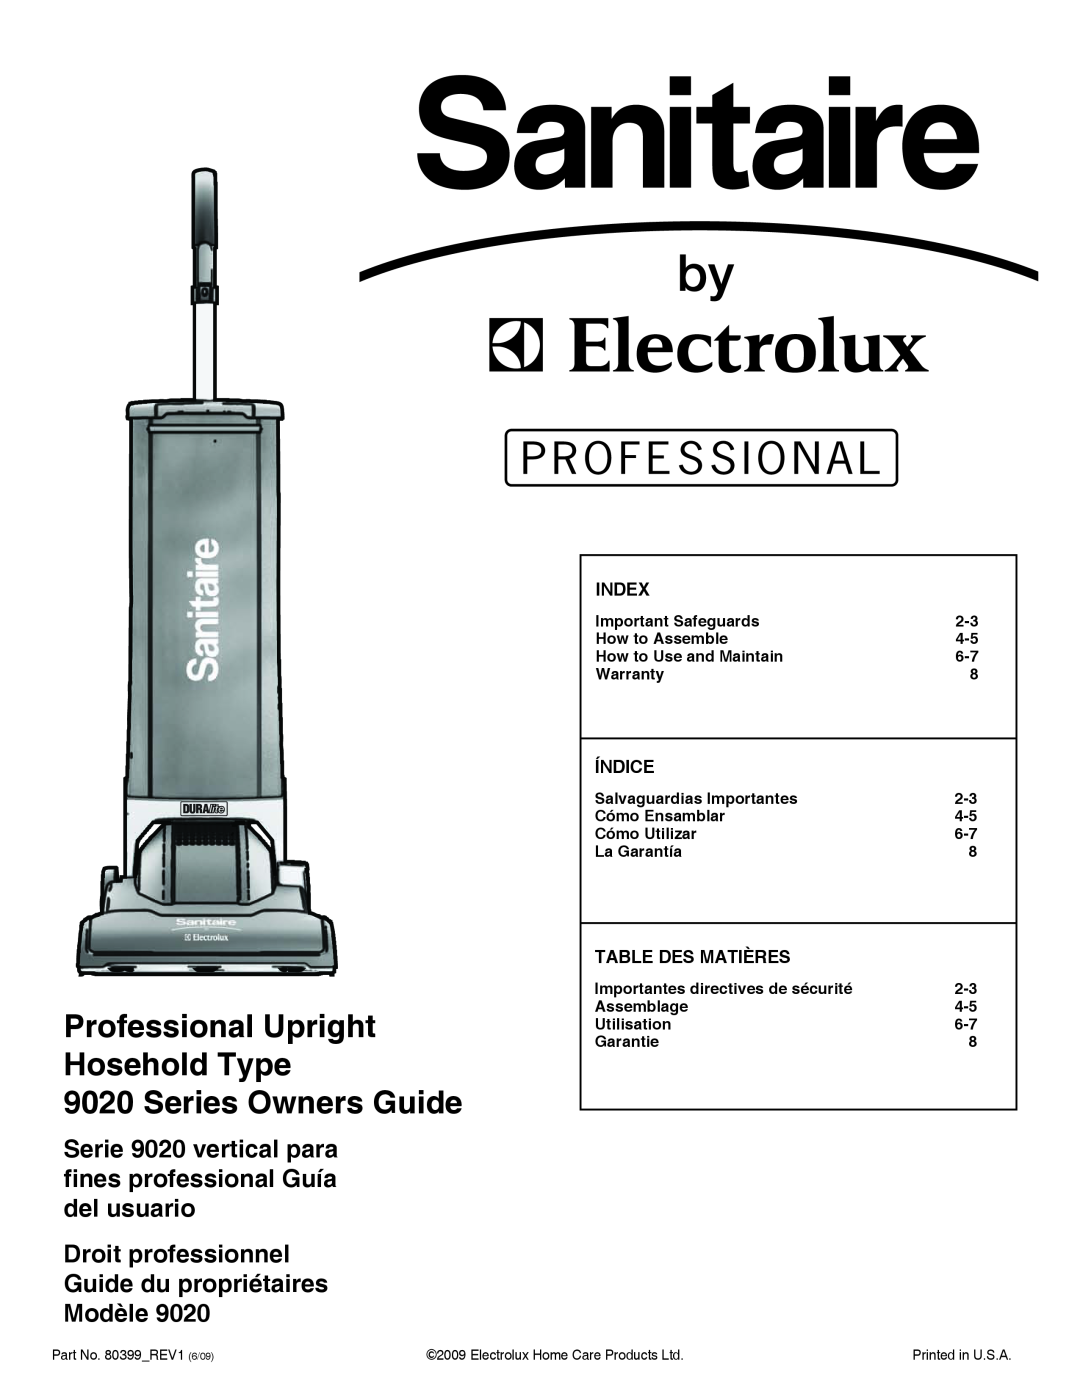 Sanitaire 9020 warranty Professional Upright Hosehold Type, Series Owners Guide 